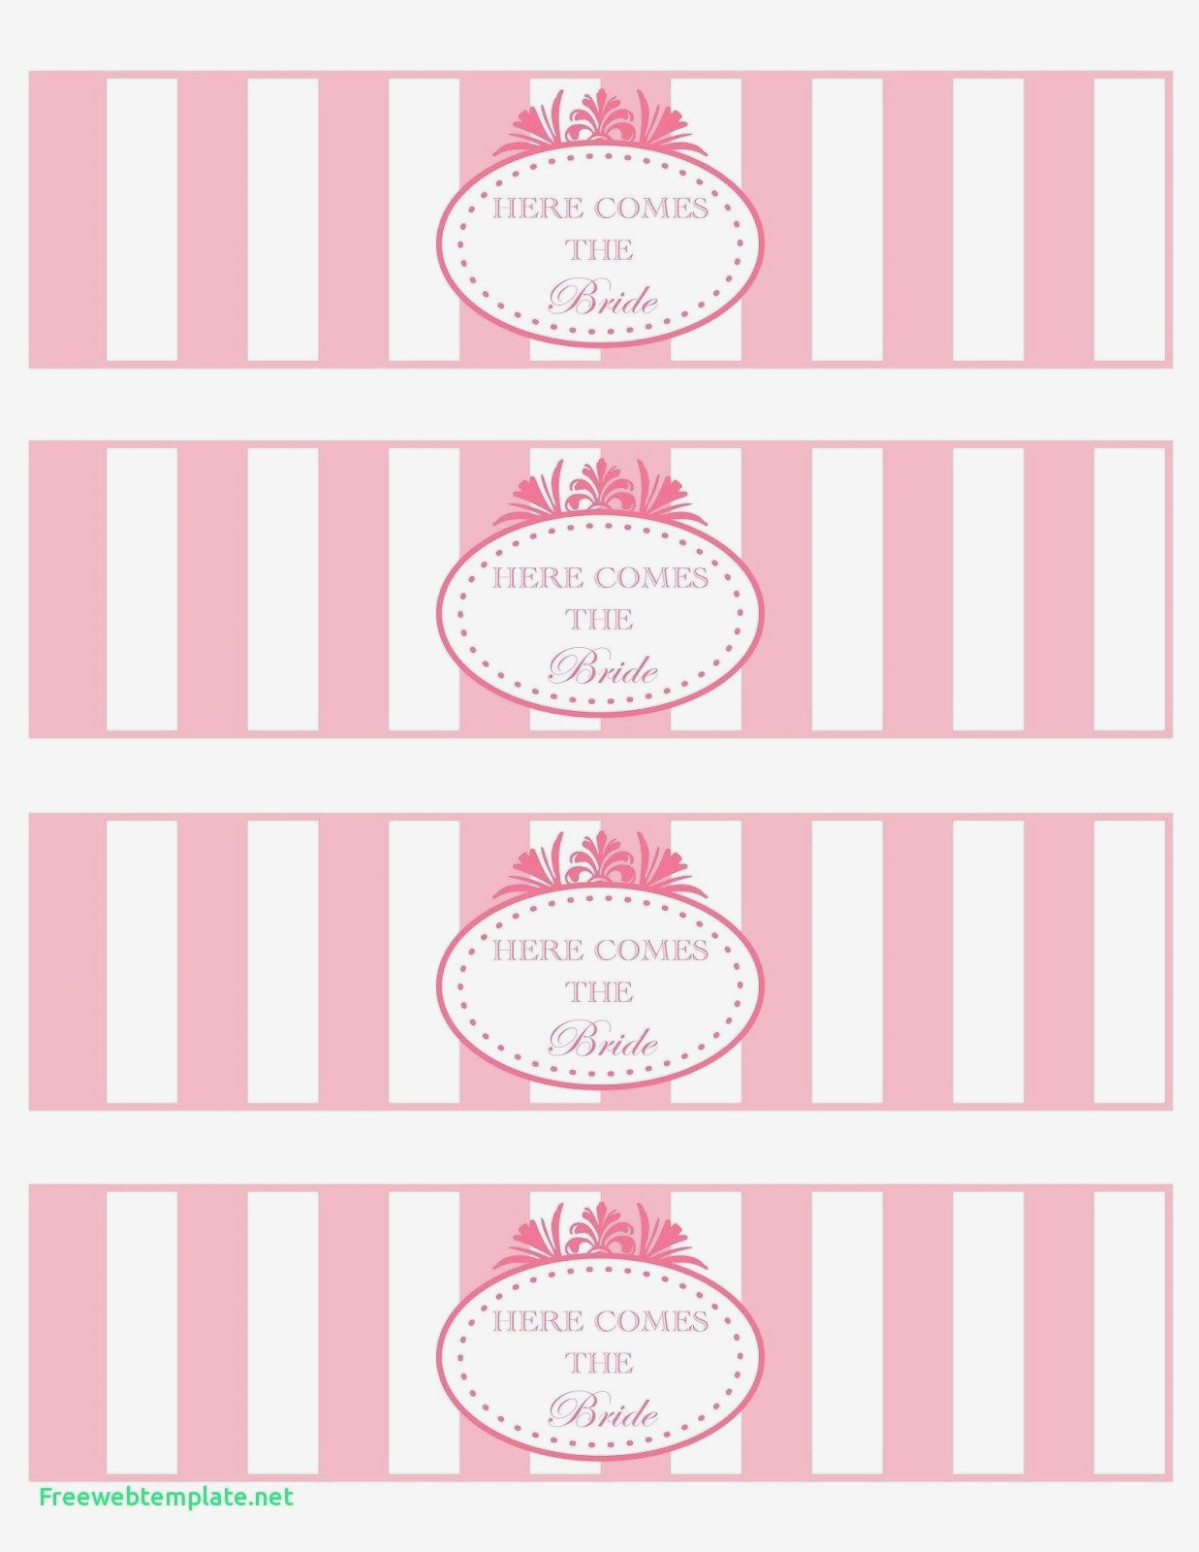 Free Printable Water Bottle Labels For Baby Shower – Hola.klonec - Free Printable Water Bottle Labels For Baby Shower